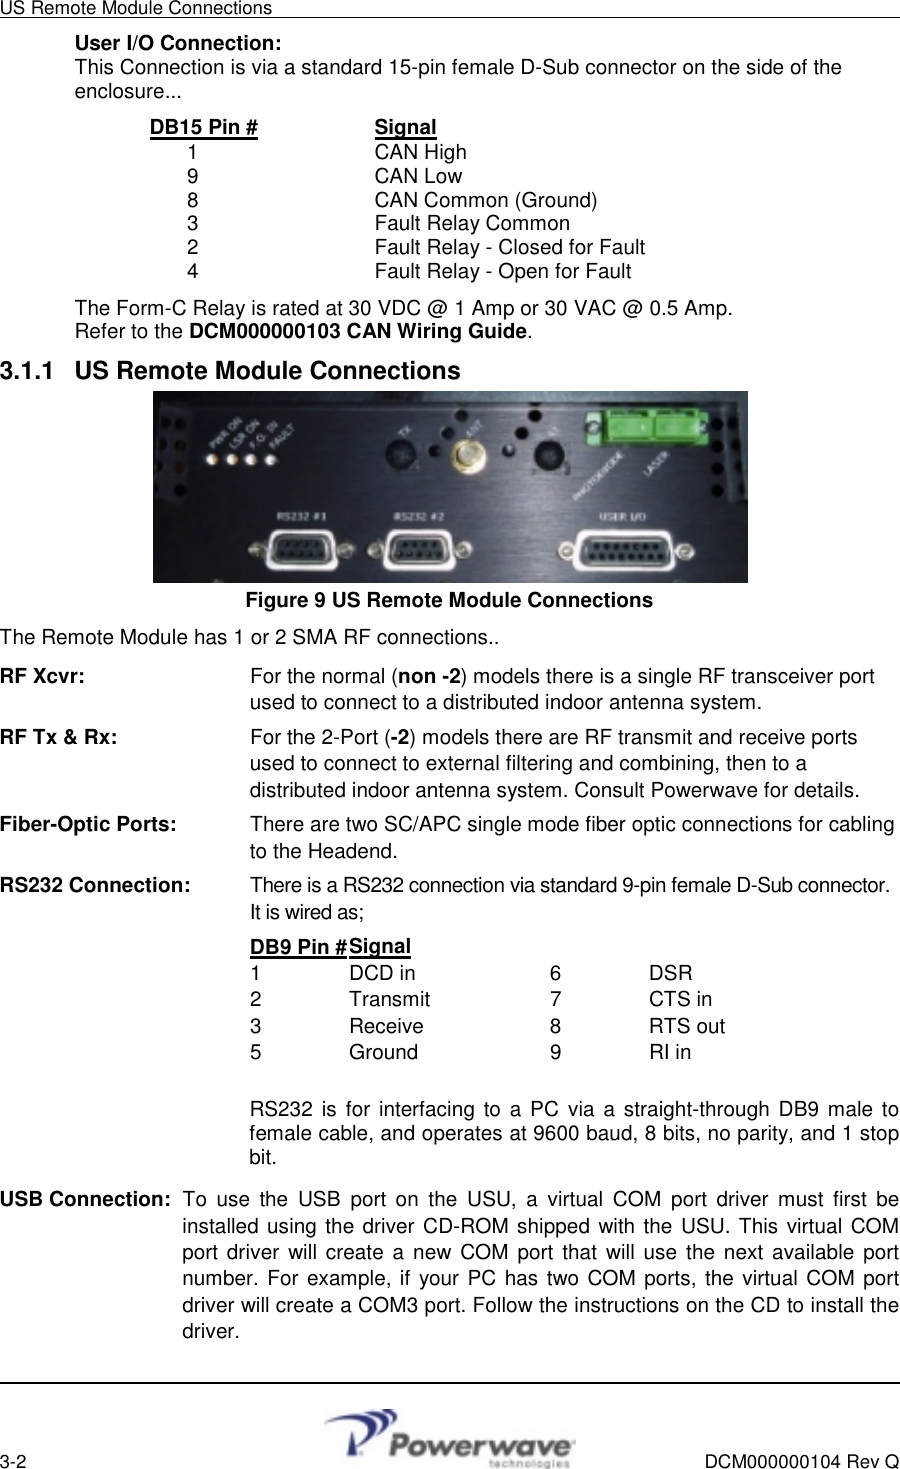 US Remote Module Connections        3-2    DCM000000104 Rev Q User I/O Connection: This Connection is via a standard 15-pin female D-Sub connector on the side of the enclosure...  DB15 Pin #   Signal  1   CAN High   9   CAN Low   8   CAN Common (Ground)   3   Fault Relay Common   2      Fault Relay - Closed for Fault   4      Fault Relay - Open for Fault The Form-C Relay is rated at 30 VDC @ 1 Amp or 30 VAC @ 0.5 Amp. Refer to the DCM000000103 CAN Wiring Guide. 3.1.1  US Remote Module Connections  Figure 9 US Remote Module Connections The Remote Module has 1 or 2 SMA RF connections.. RF Xcvr:    For the normal (non -2) models there is a single RF transceiver port used to connect to a distributed indoor antenna system. RF Tx &amp; Rx:      For the 2-Port (-2) models there are RF transmit and receive ports used to connect to external filtering and combining, then to a distributed indoor antenna system. Consult Powerwave for details. Fiber-Optic Ports:    There are two SC/APC single mode fiber optic connections for cabling to the Headend. RS232 Connection:    There is a RS232 connection via standard 9-pin female D-Sub connector. It is wired as;      DB9 Pin # Signal      1  DCD in   6  DSR       2  Transmit   7  CTS in      3  Receive   8  RTS out      5  Ground   9  RI in                 RS232 is for interfacing to a PC via a straight-through DB9 male to female cable, and operates at 9600 baud, 8 bits, no parity, and 1 stop bit. USB Connection: To use the USB port on the USU, a virtual COM port driver must first be installed using the driver CD-ROM shipped with the USU. This virtual COM port driver will create a new COM port that will use the next available port number. For example, if your PC has two COM ports, the virtual COM port driver will create a COM3 port. Follow the instructions on the CD to install the driver.      